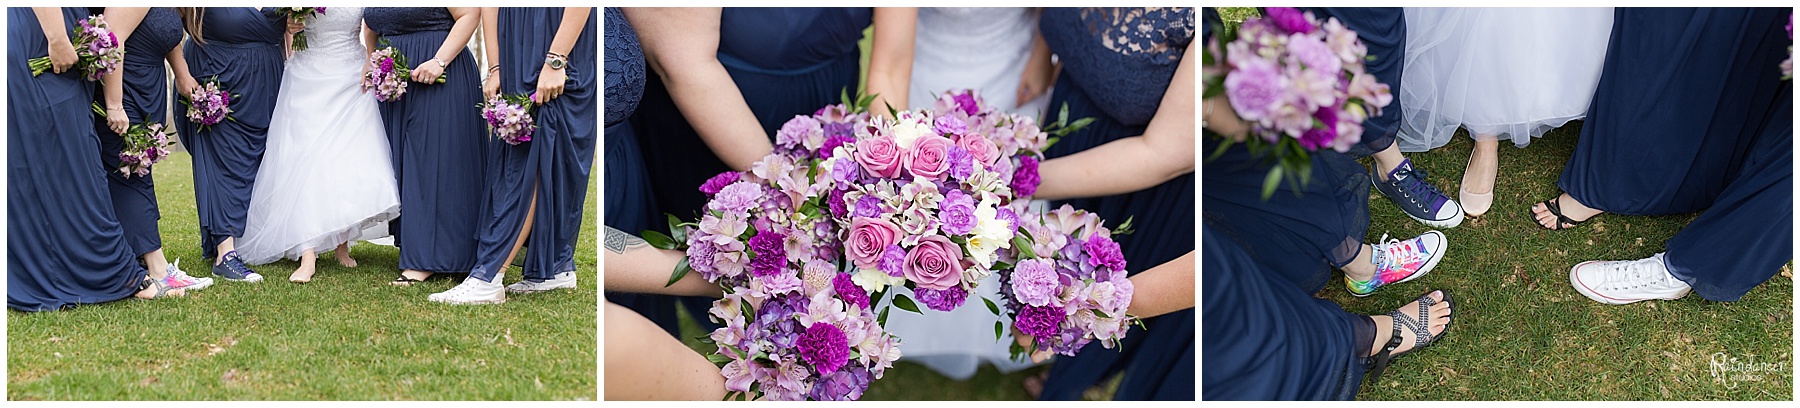 Bridal party's bouquets by Raindancer Studios Indianapolis Wedding photographer Jill Howell 